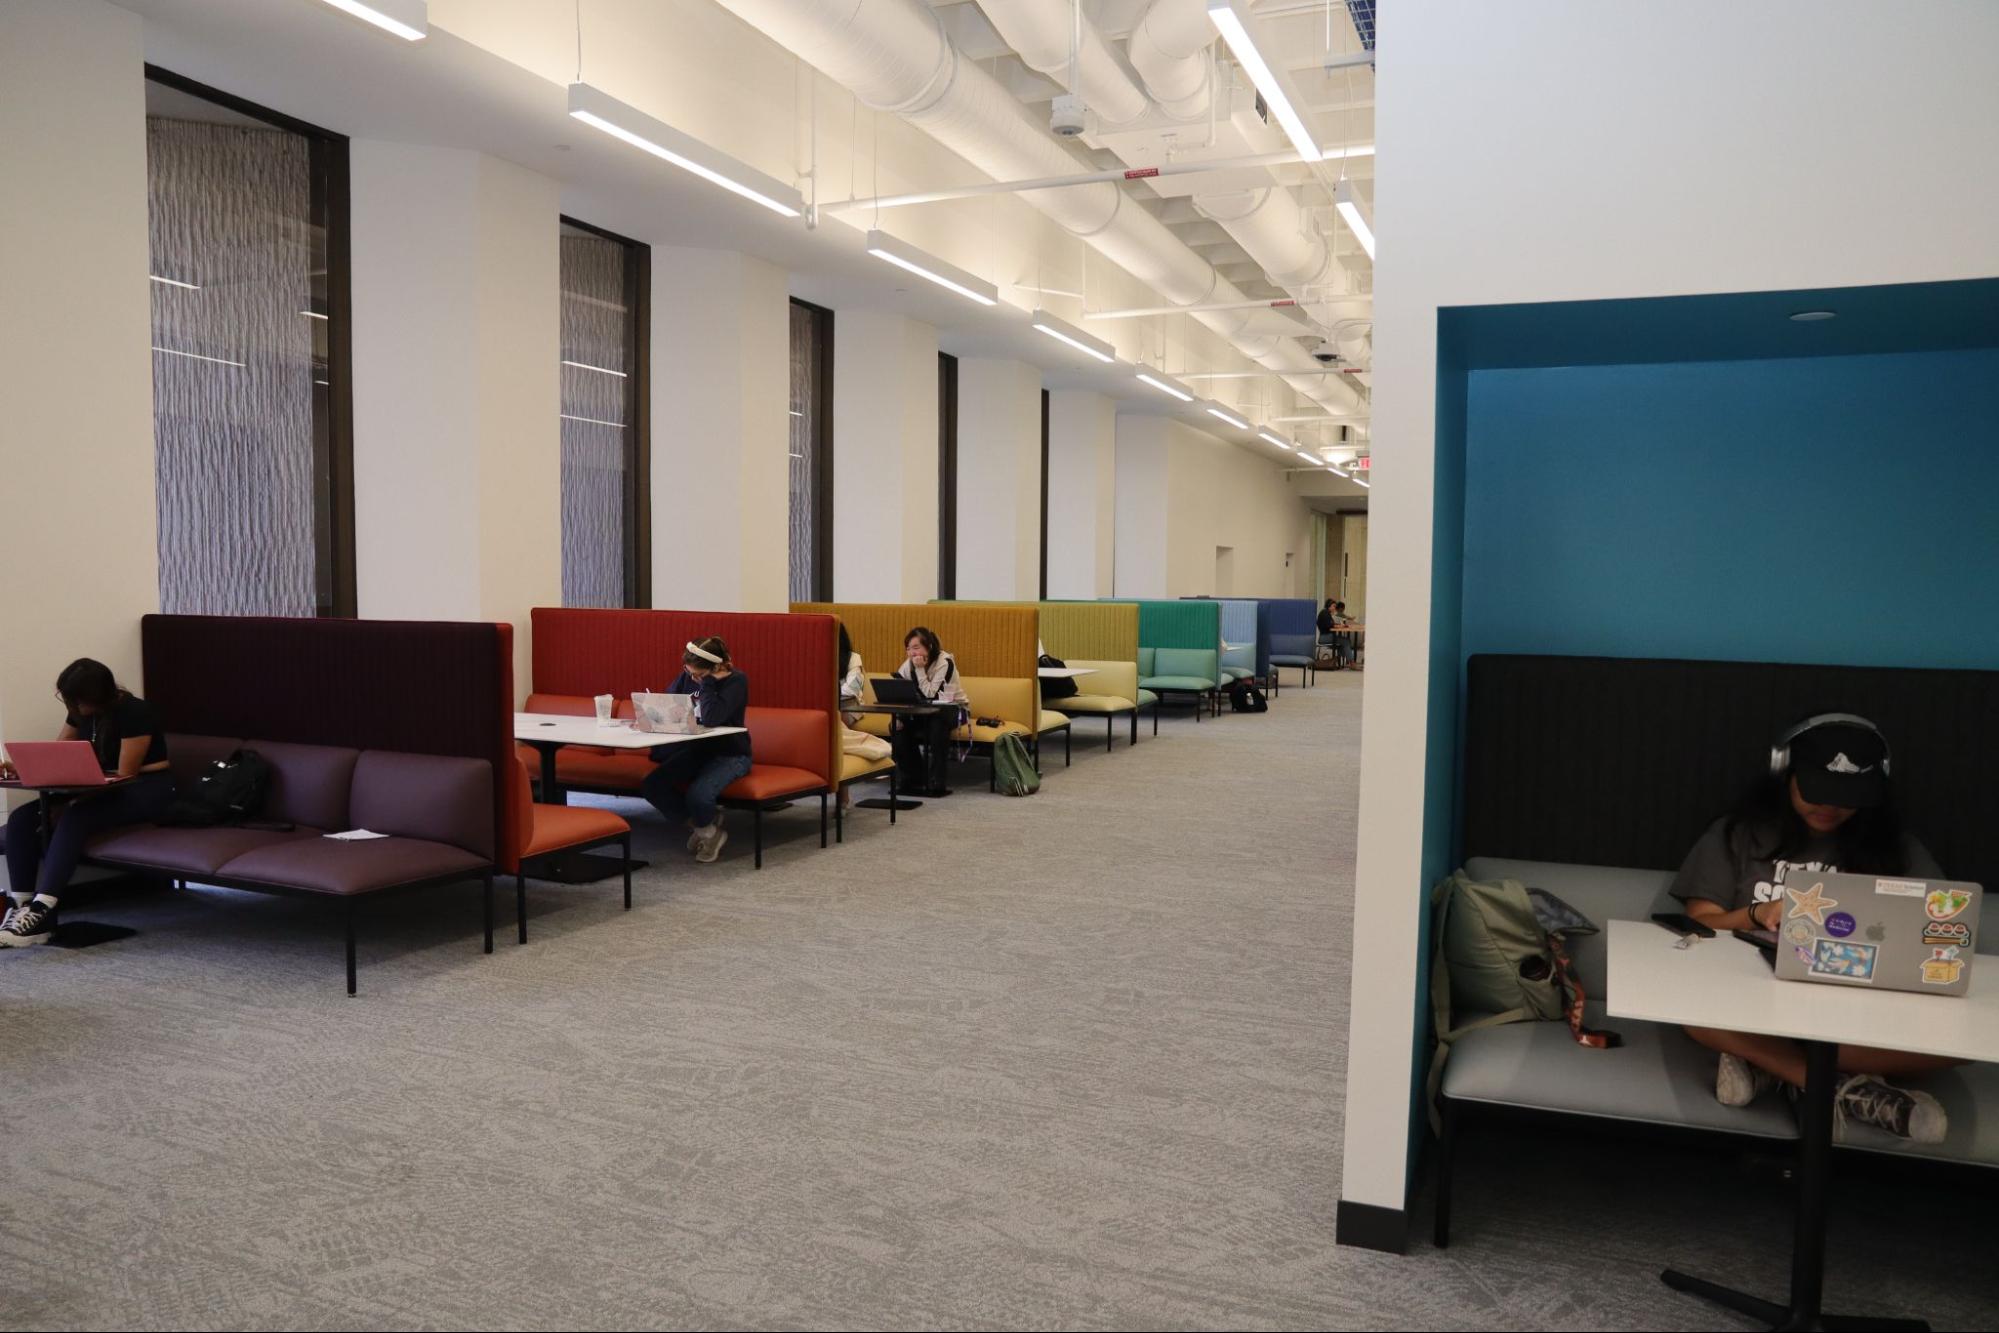 The open study space in the Scholars Lab features colorful couches near large windows. Additionally, there is a couch positioned on the right side of the colorful couches, adjacent to a wall. Individuals can be seen reading or using laptops.